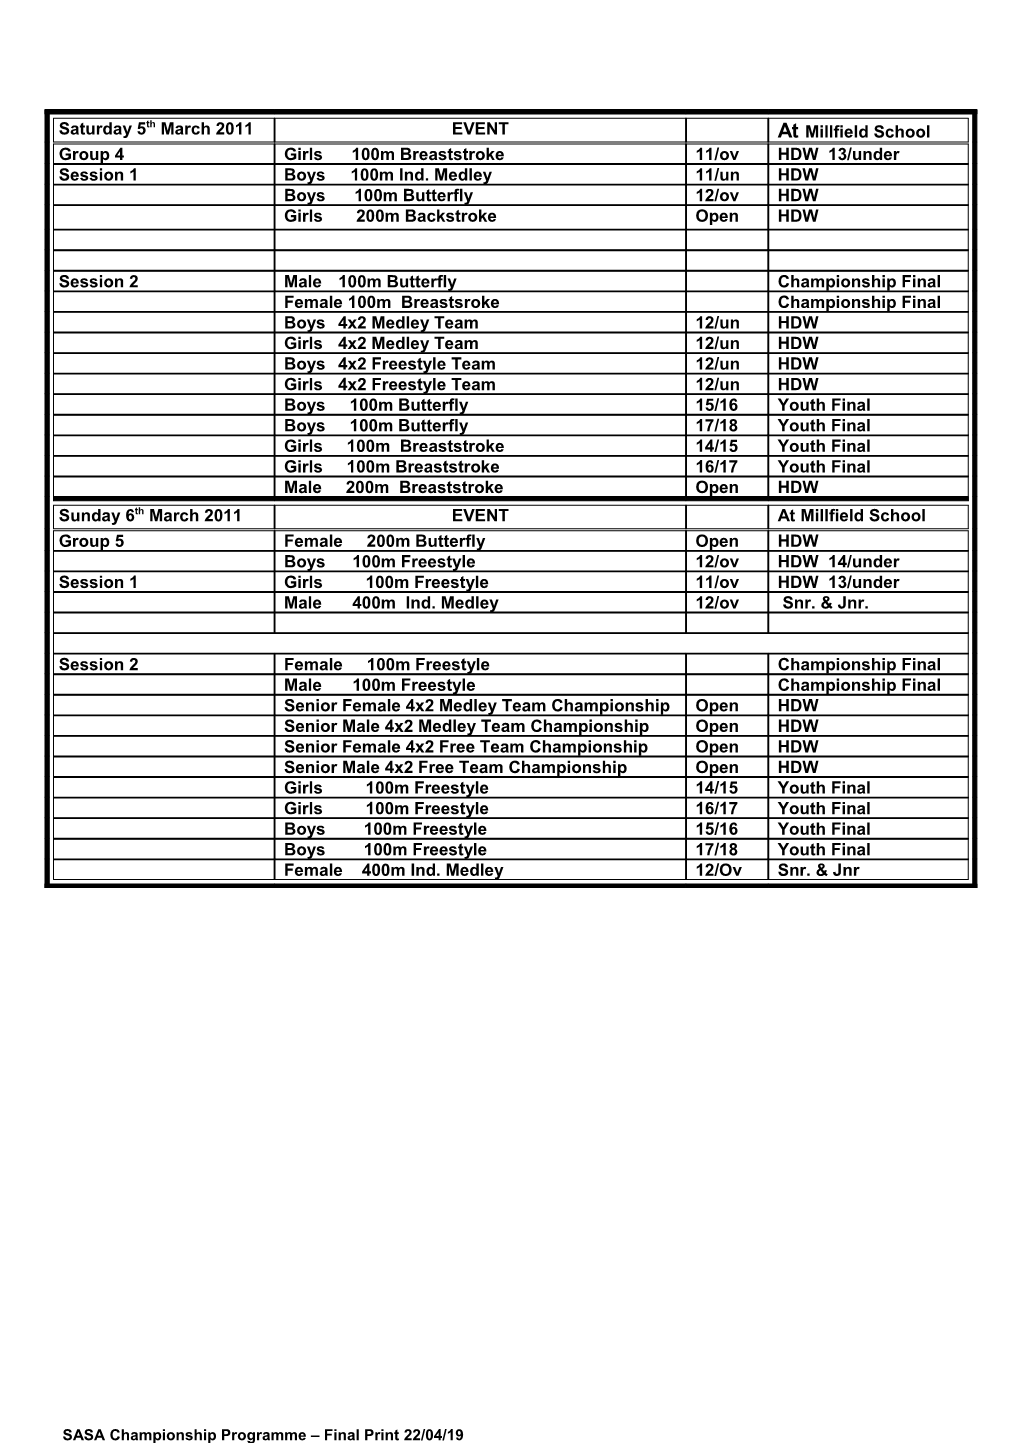 Somerset County Age Groups & Championships 2002